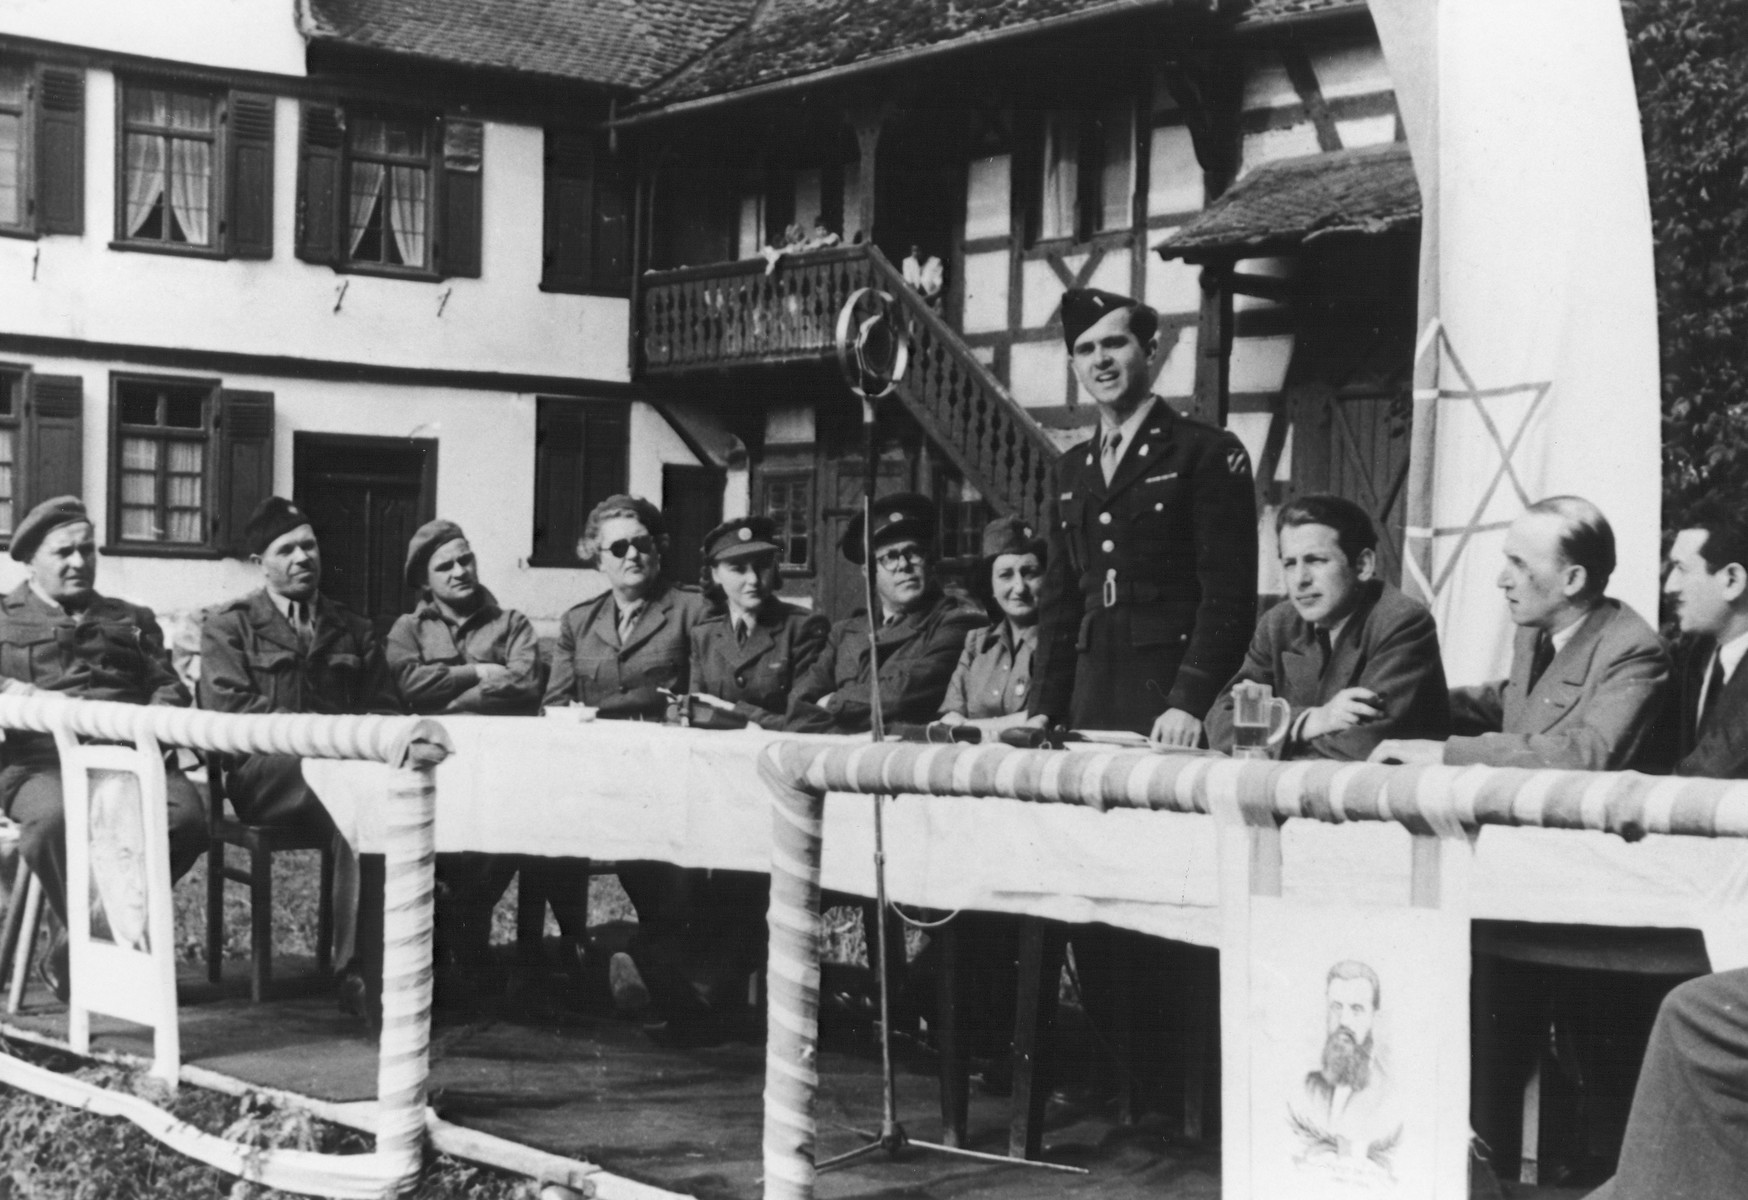 Chaplain Mayer Abramowitz addresses an outdoor Zionist meeting in Germany.